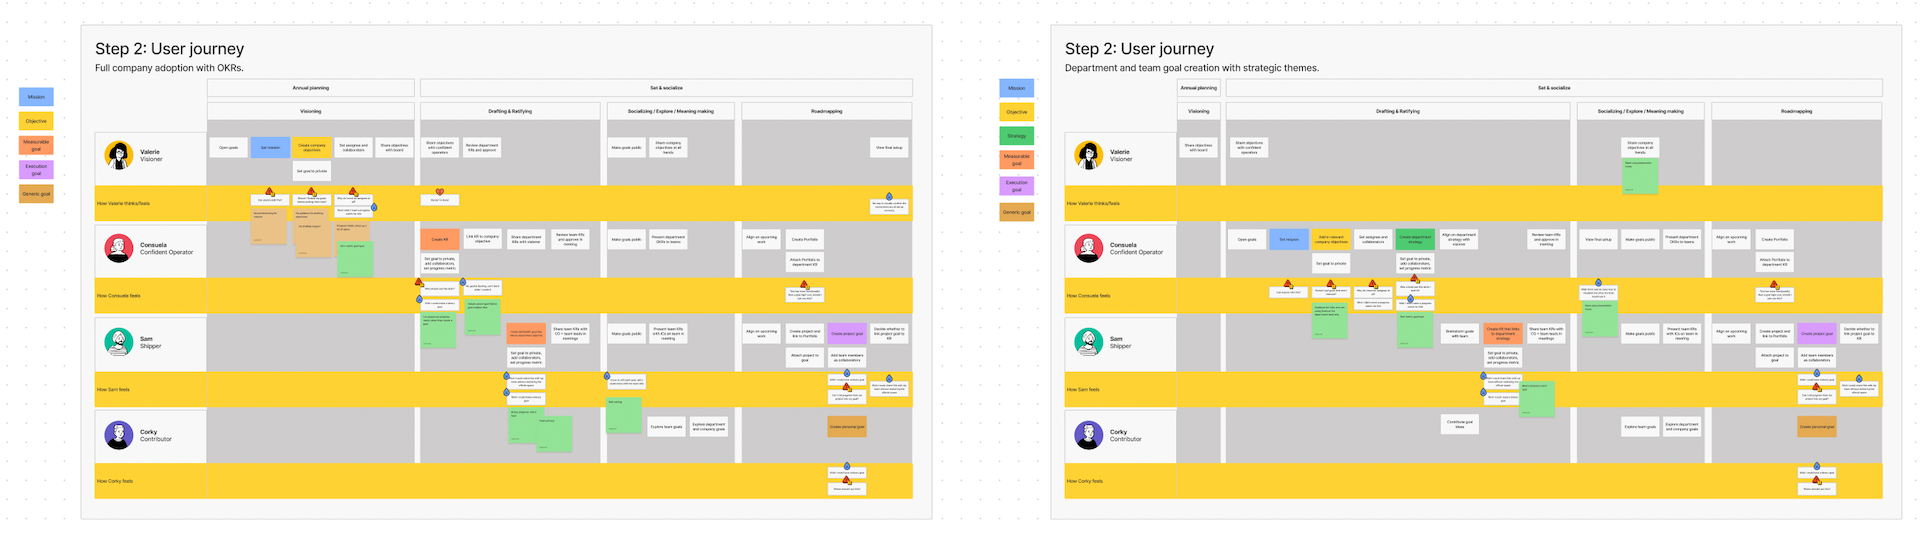 User journeys for our two target goal management structures.